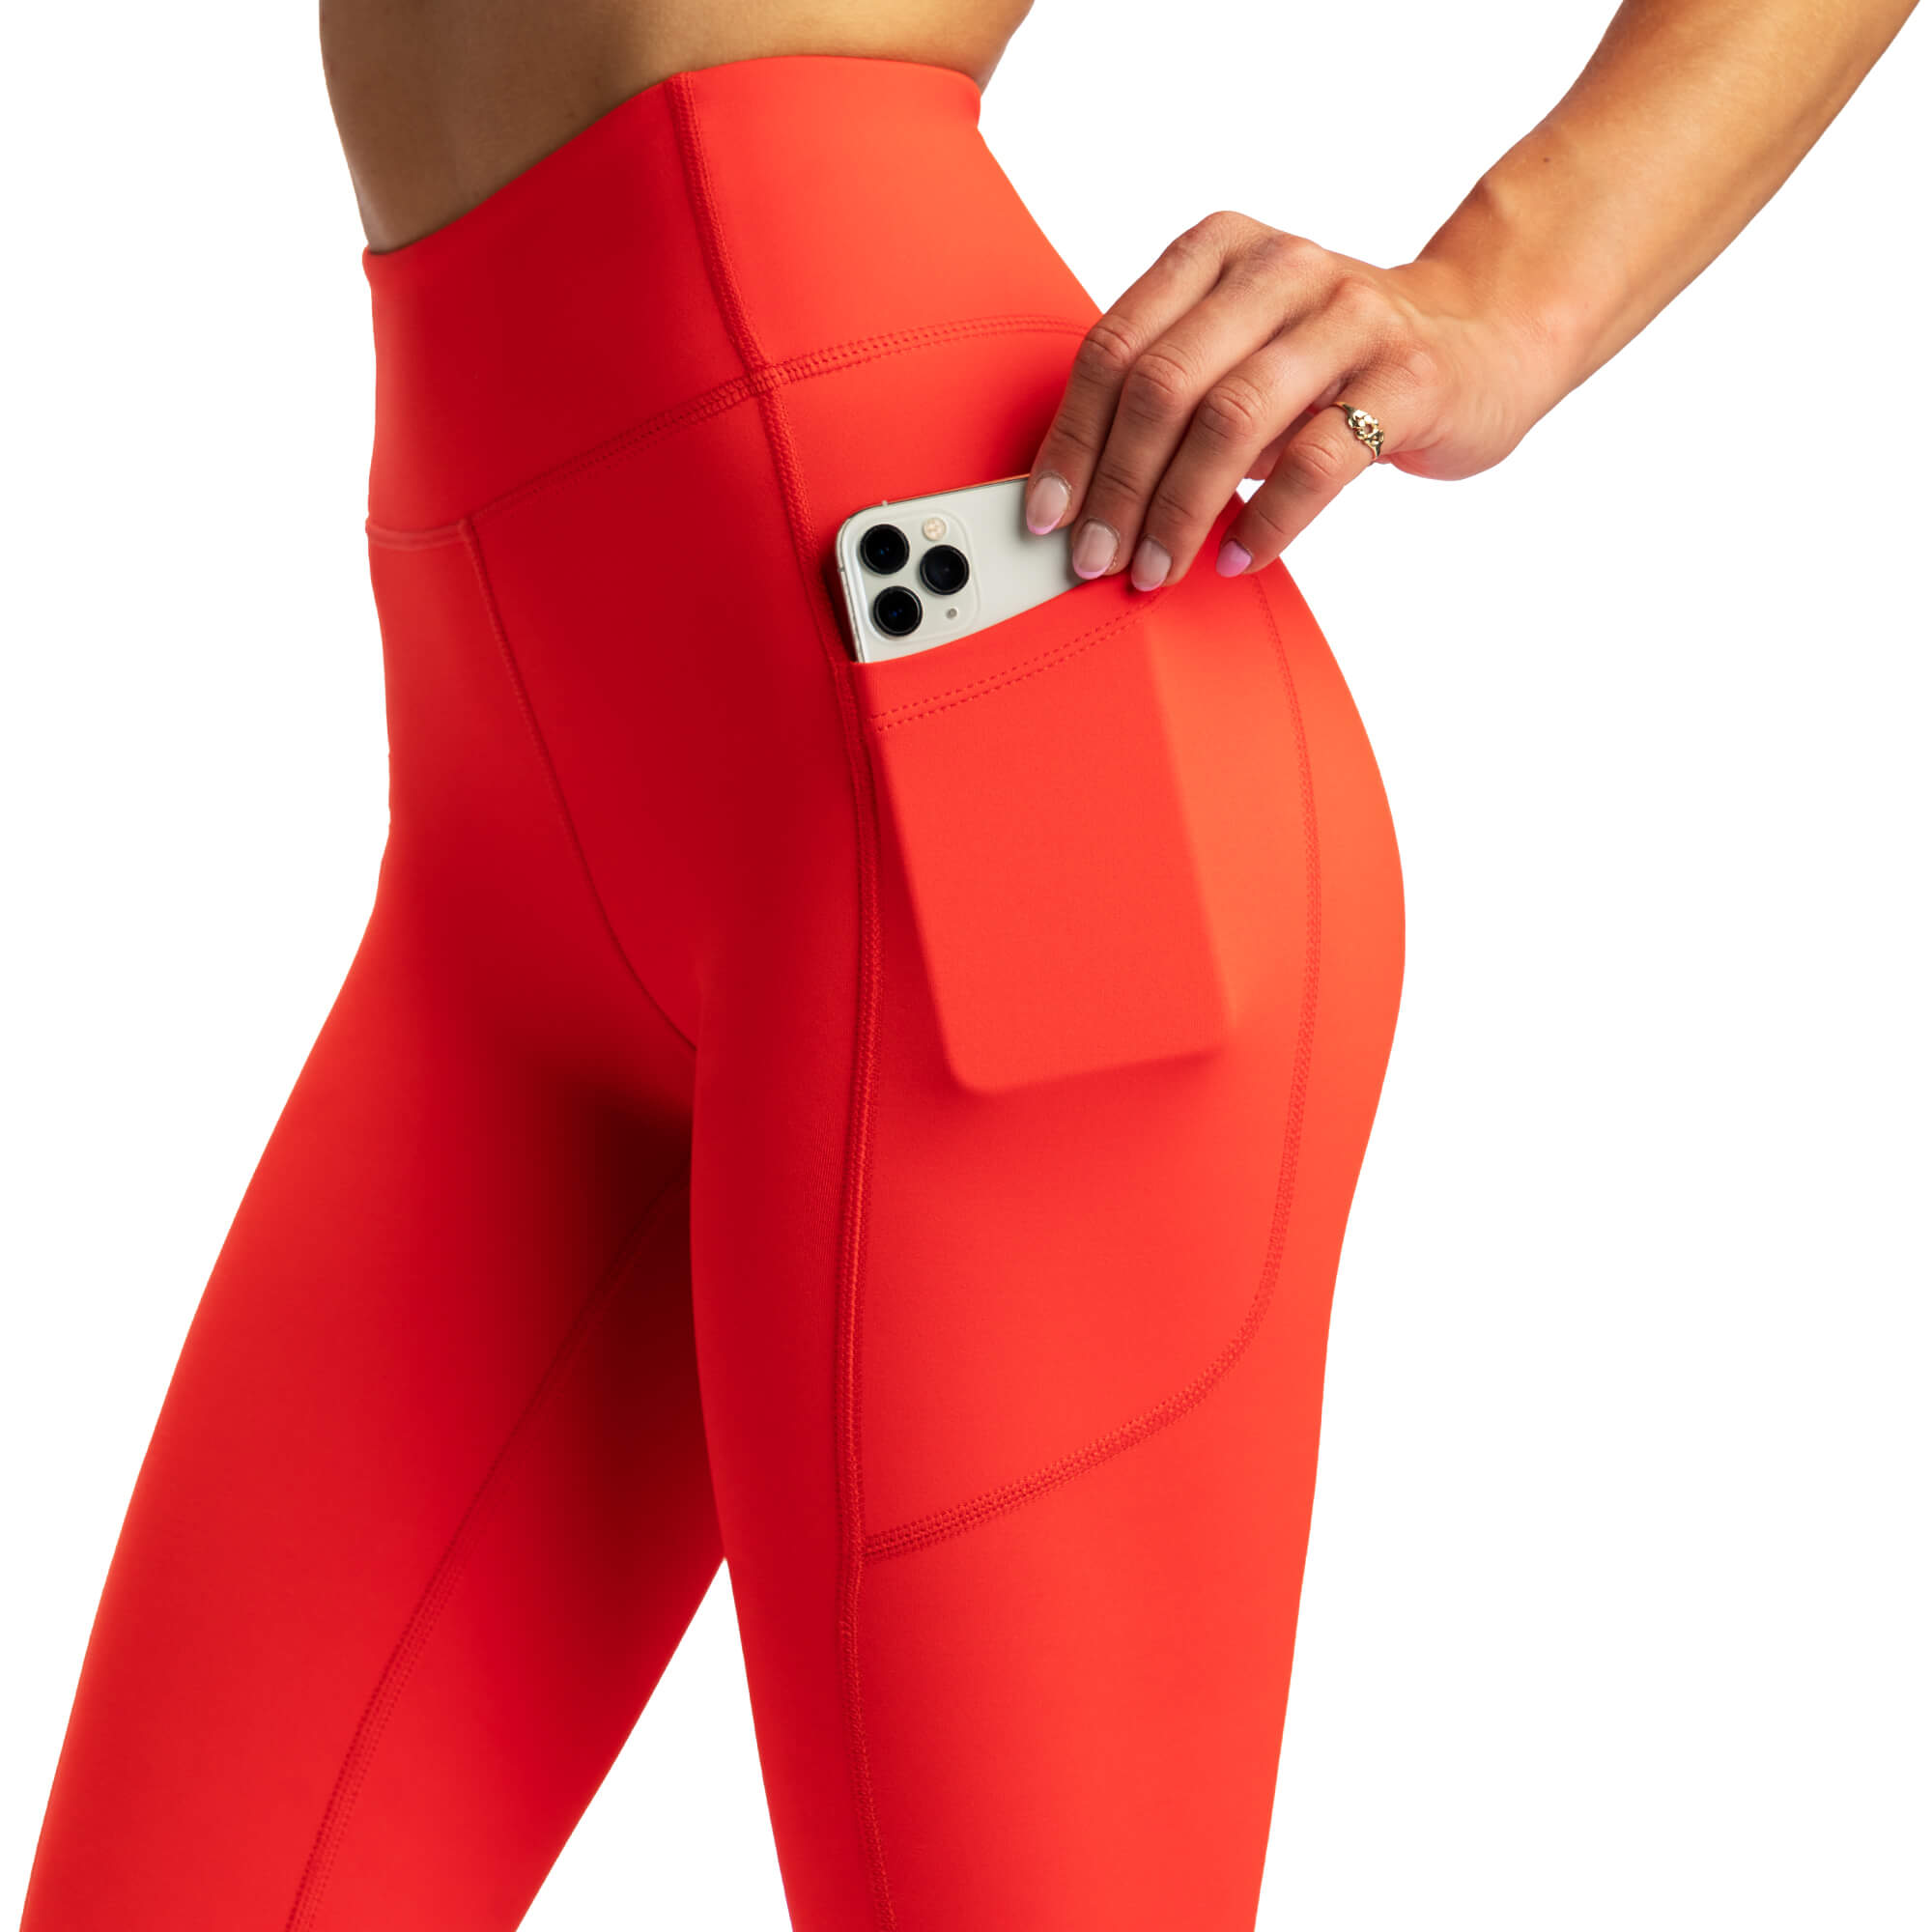 Arsenal High-Waisted Pockets Leggings - Coral - Rise